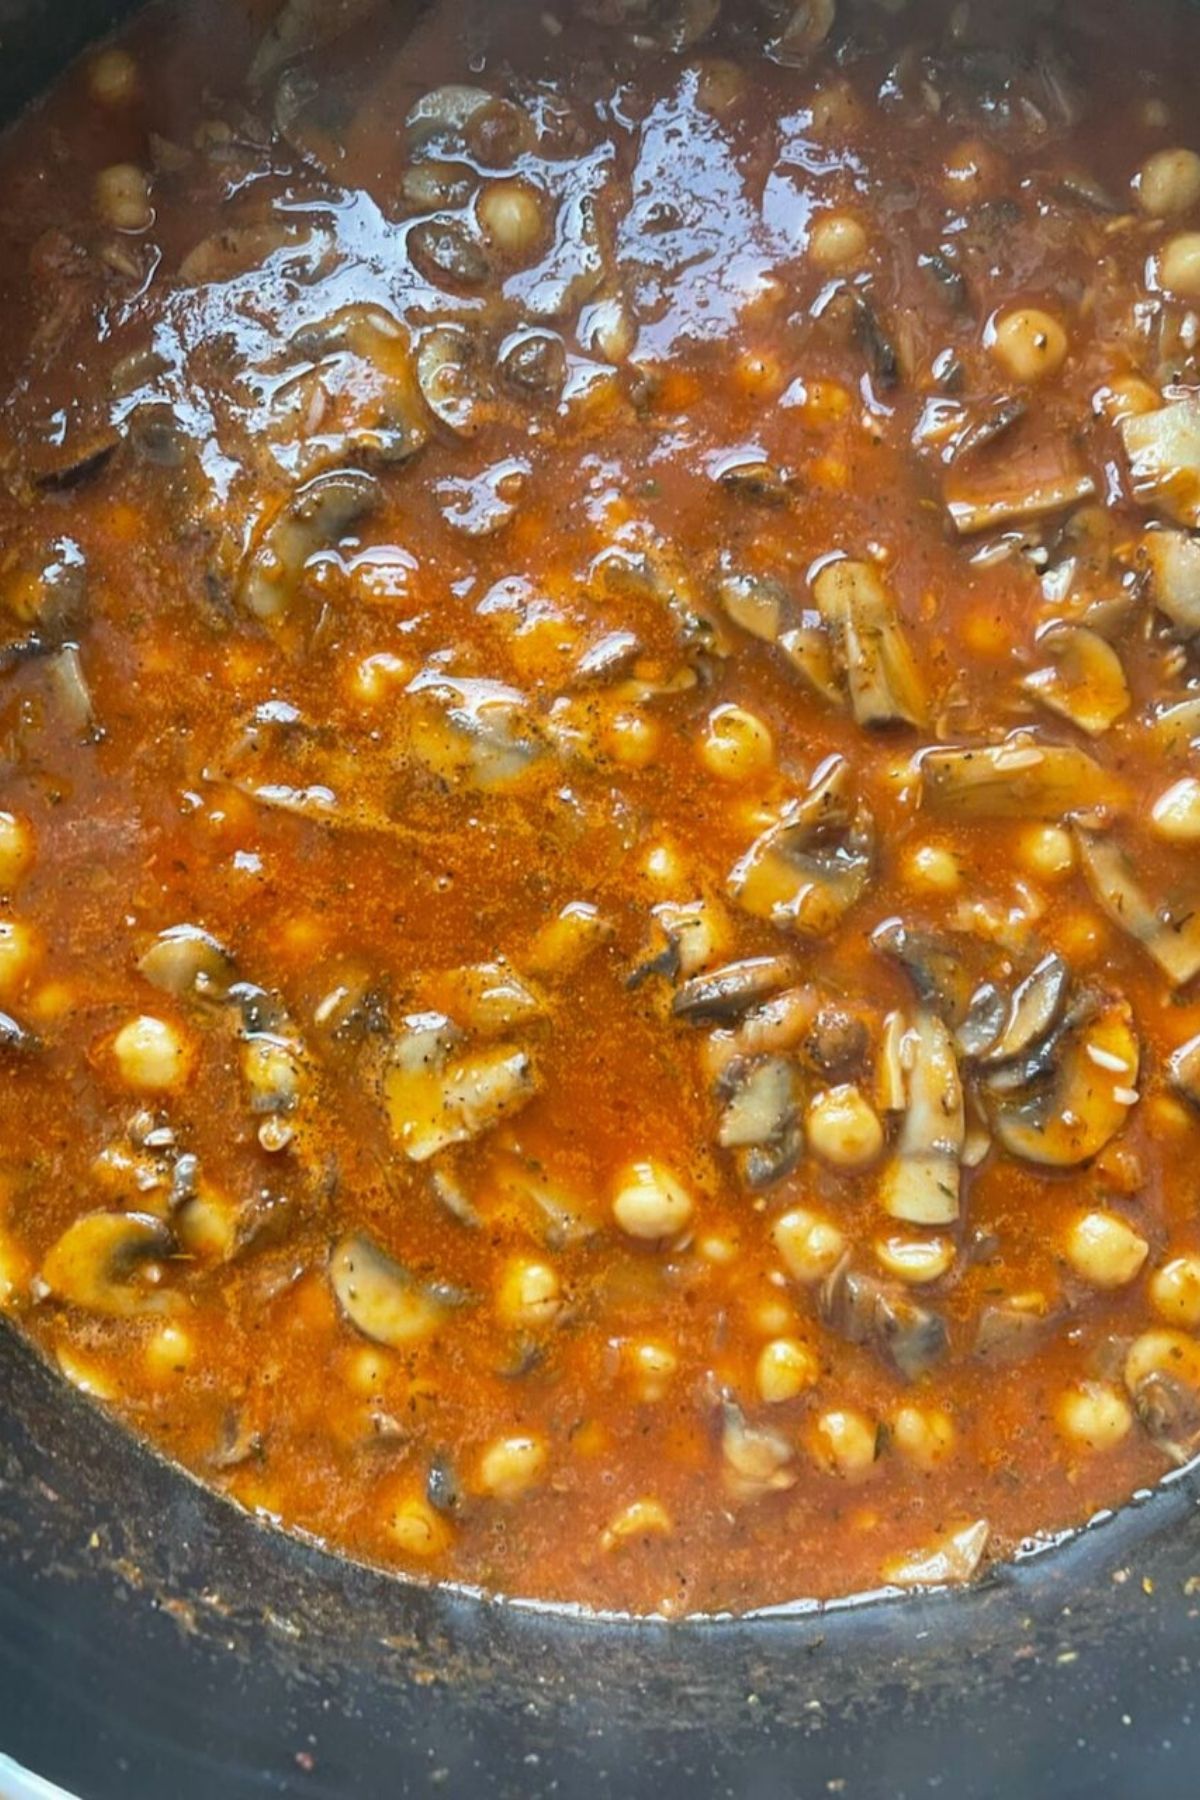 Tomatoes, mushroom and chickpea in a pot simmering